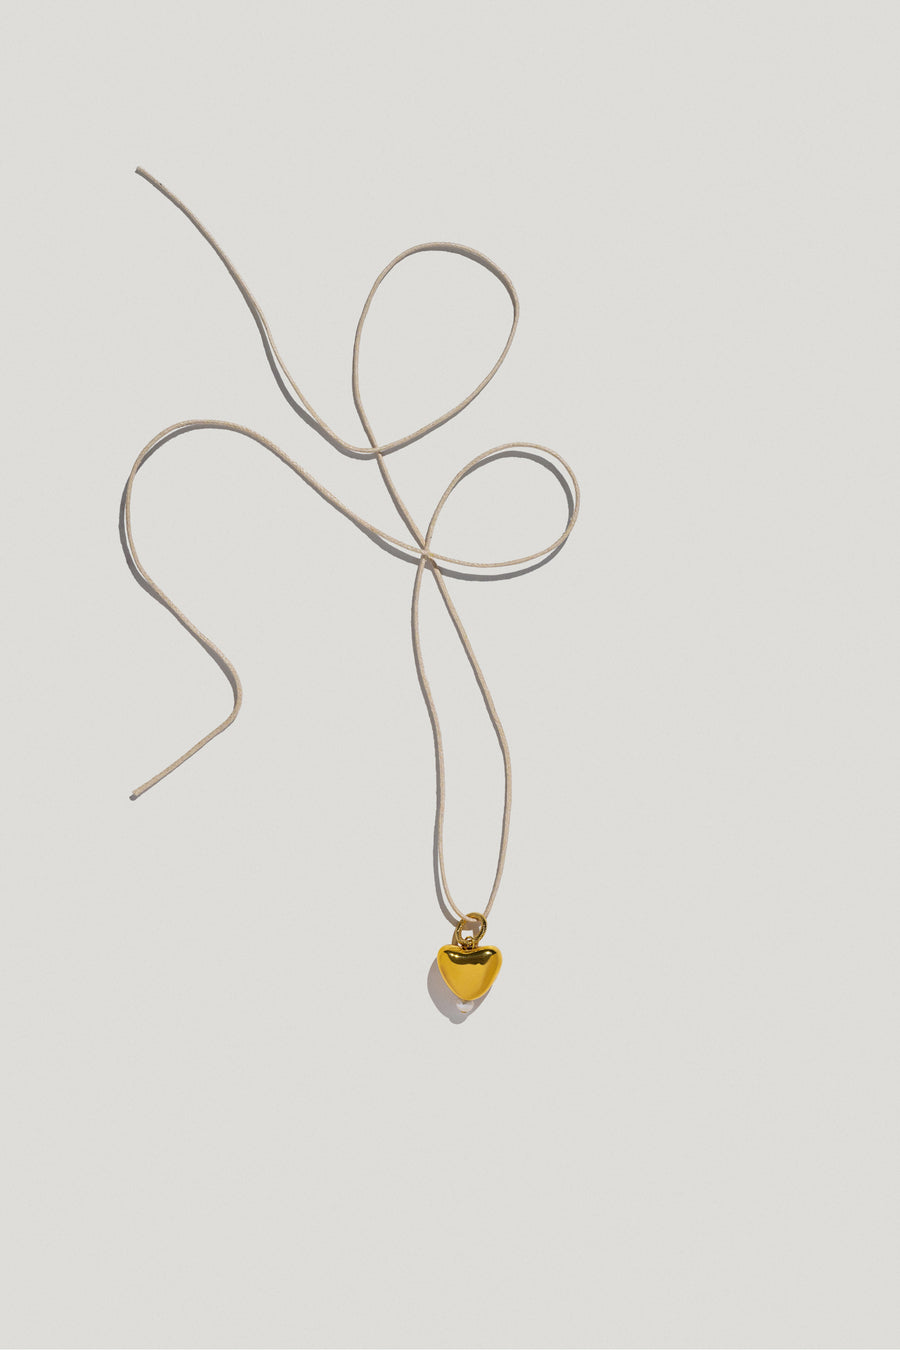 Skarb gold heart pendant small